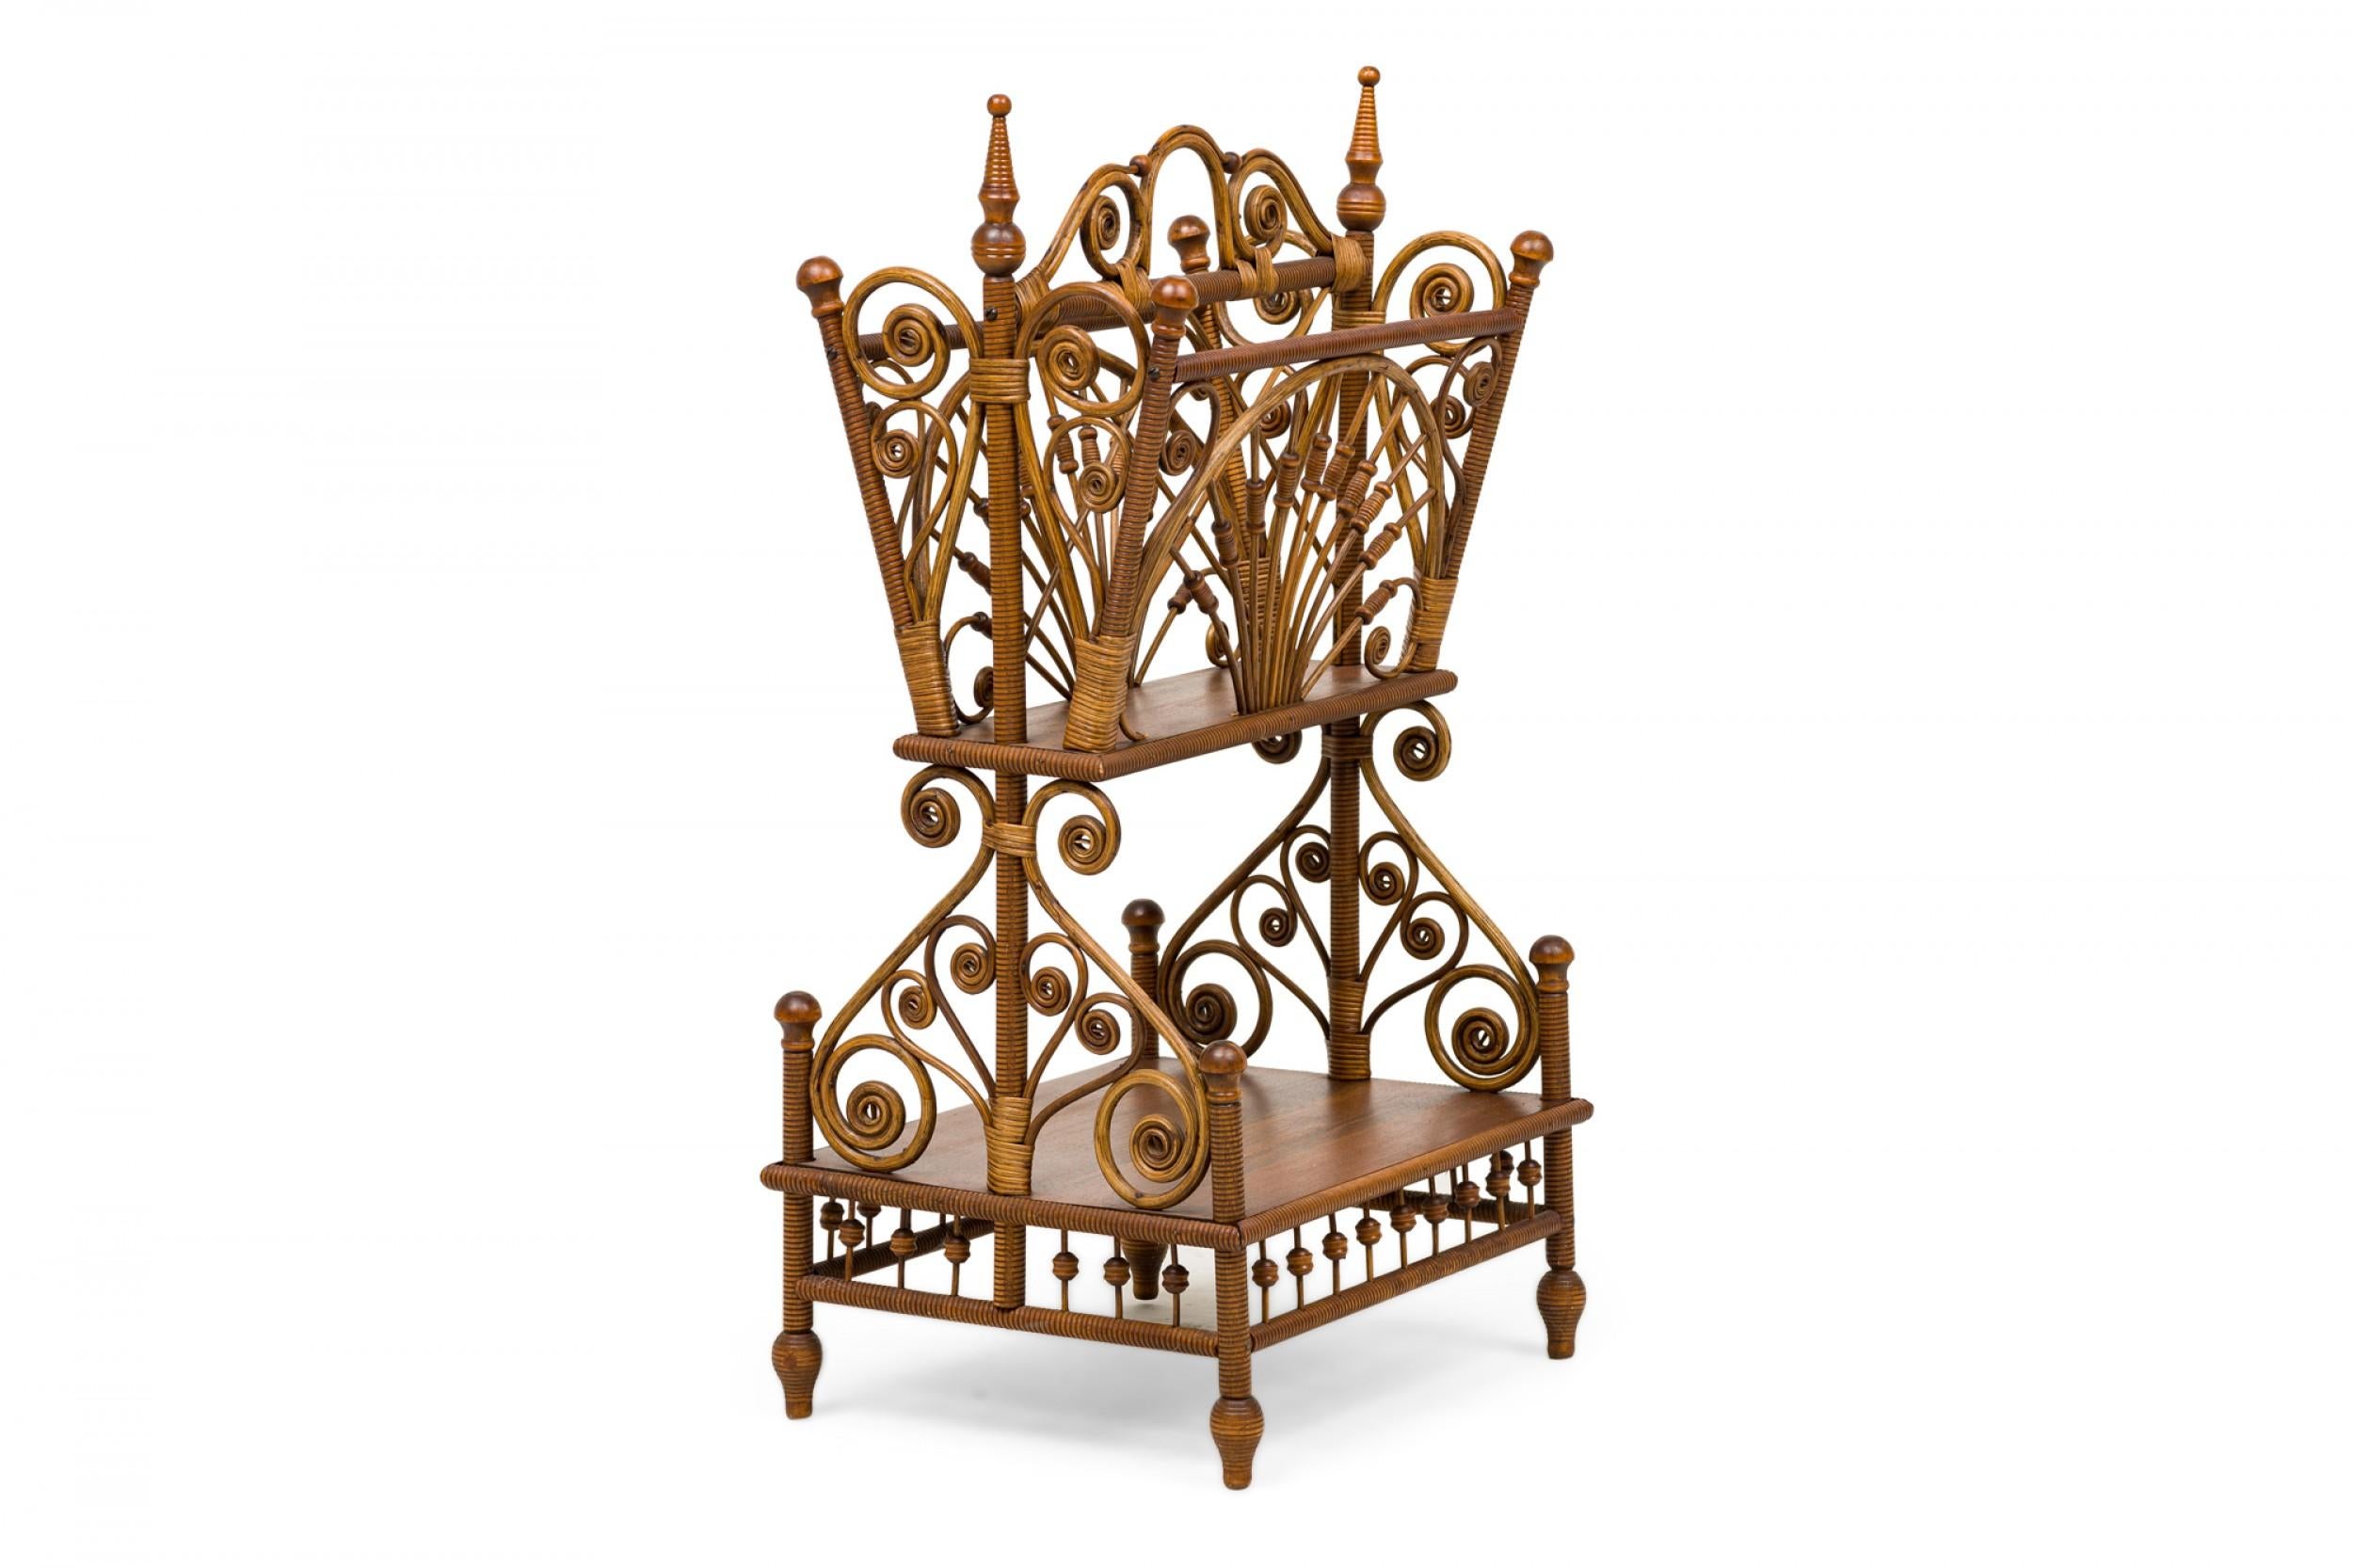 American Victorian Wicker and wood 2-tiered magazine stand with a rectangular stretcher shelf, with openwork decorative scroll motif and turned finials and feet. (att: HEYWOOD WAKEFIELD).